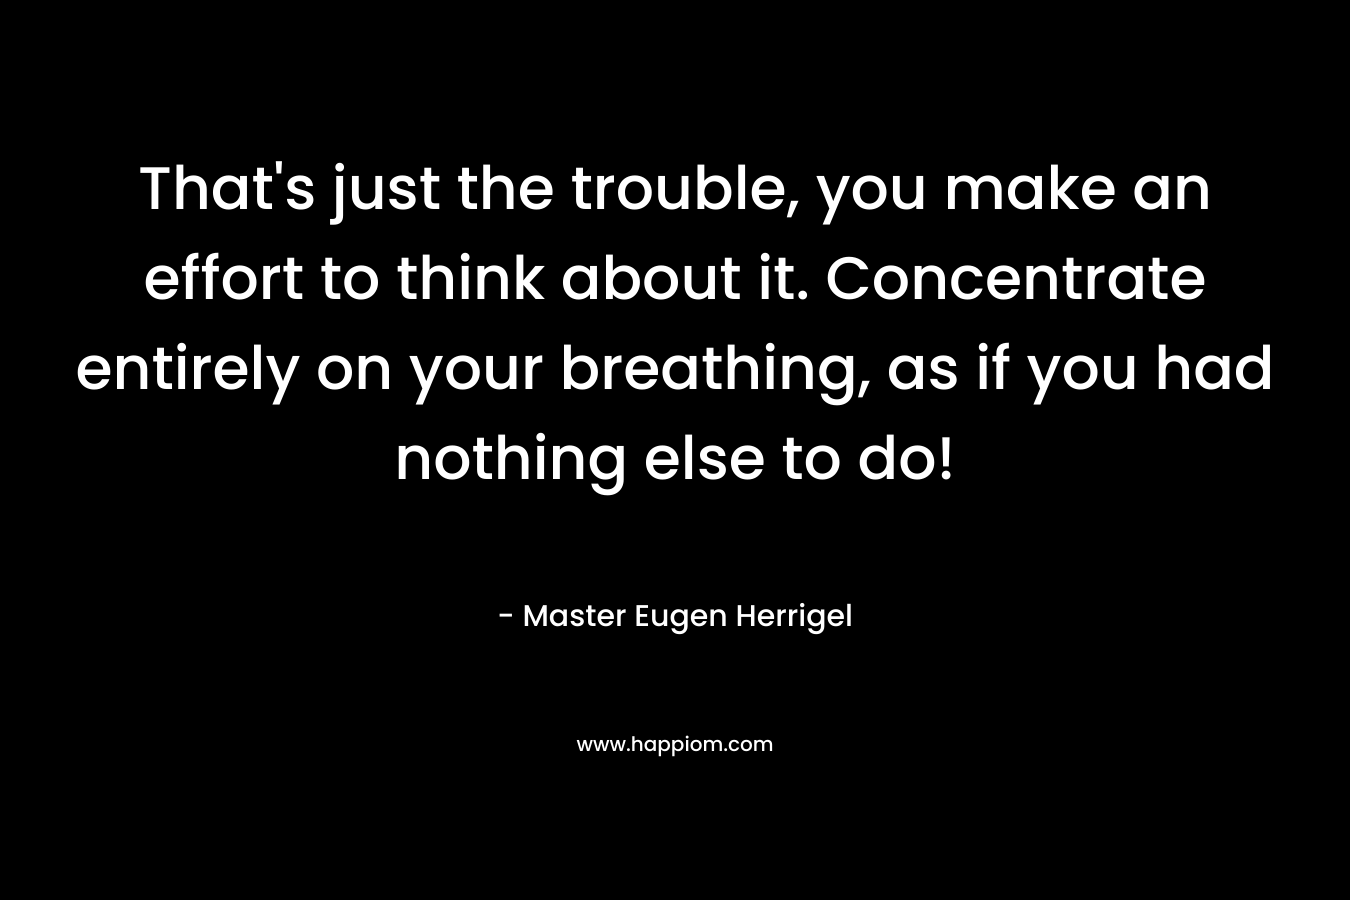 That’s just the trouble, you make an effort to think about it. Concentrate entirely on your breathing, as if you had nothing else to do! – Master Eugen Herrigel